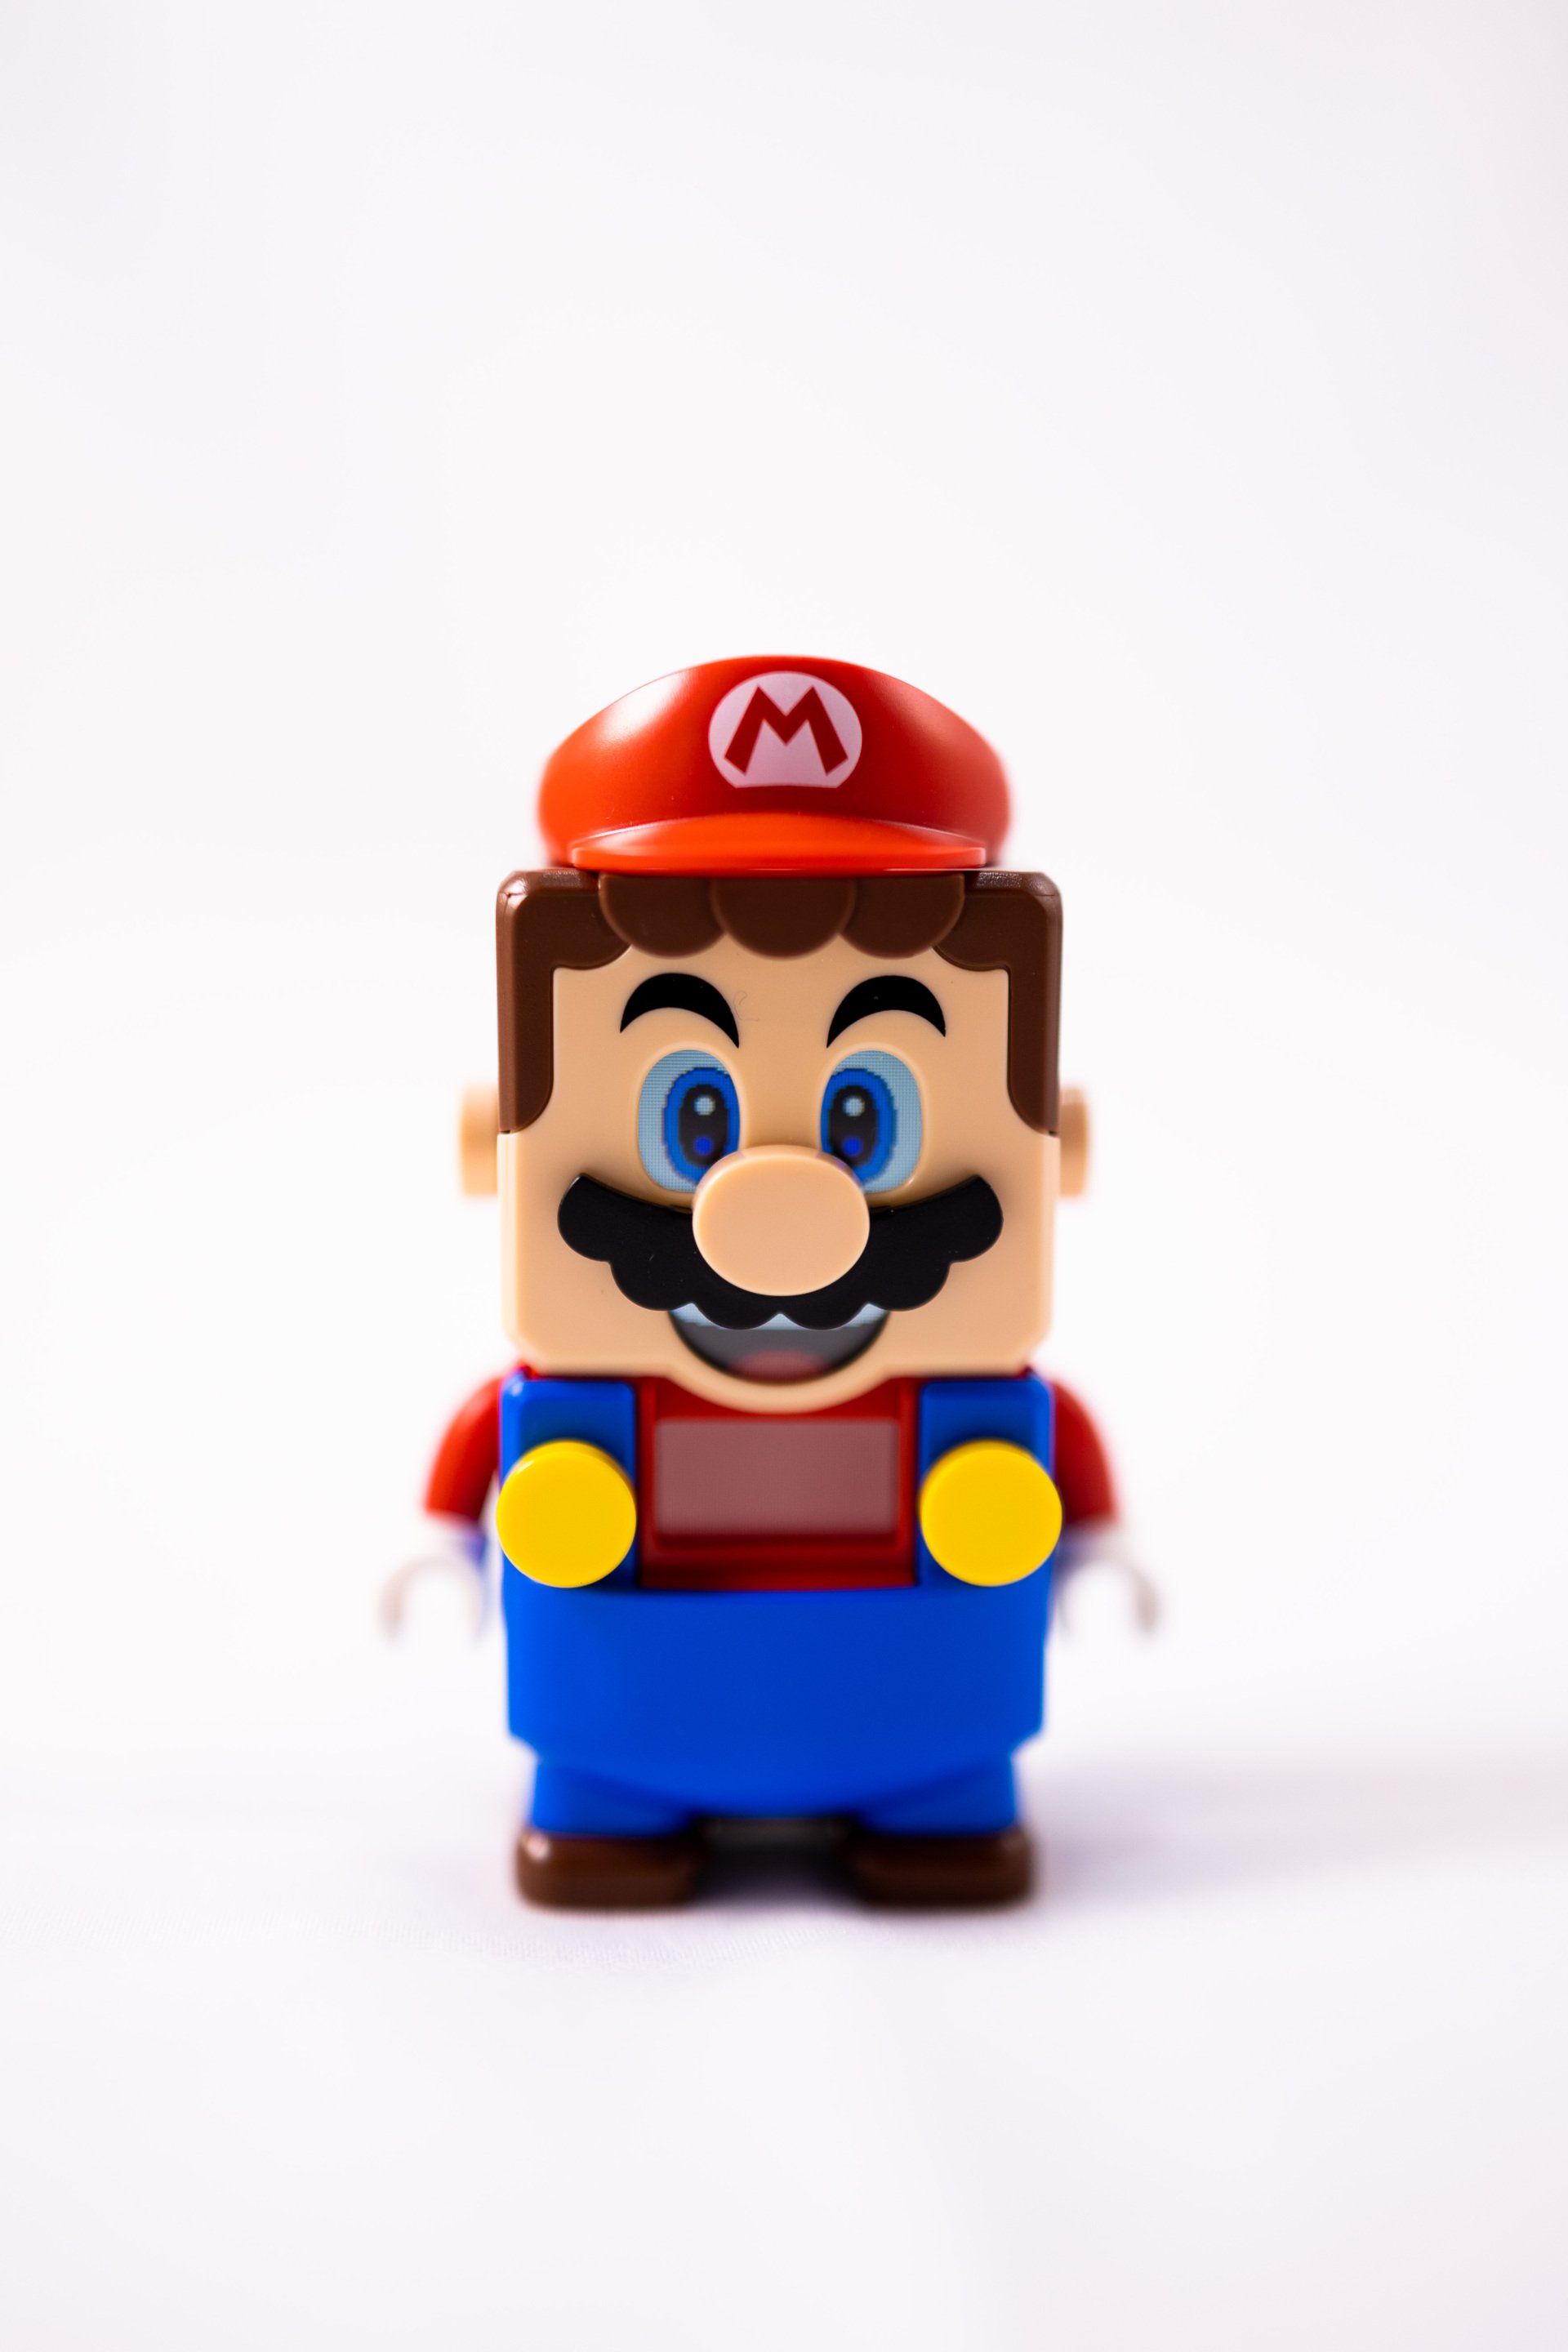 digital ads for service based business with mr plumber toy